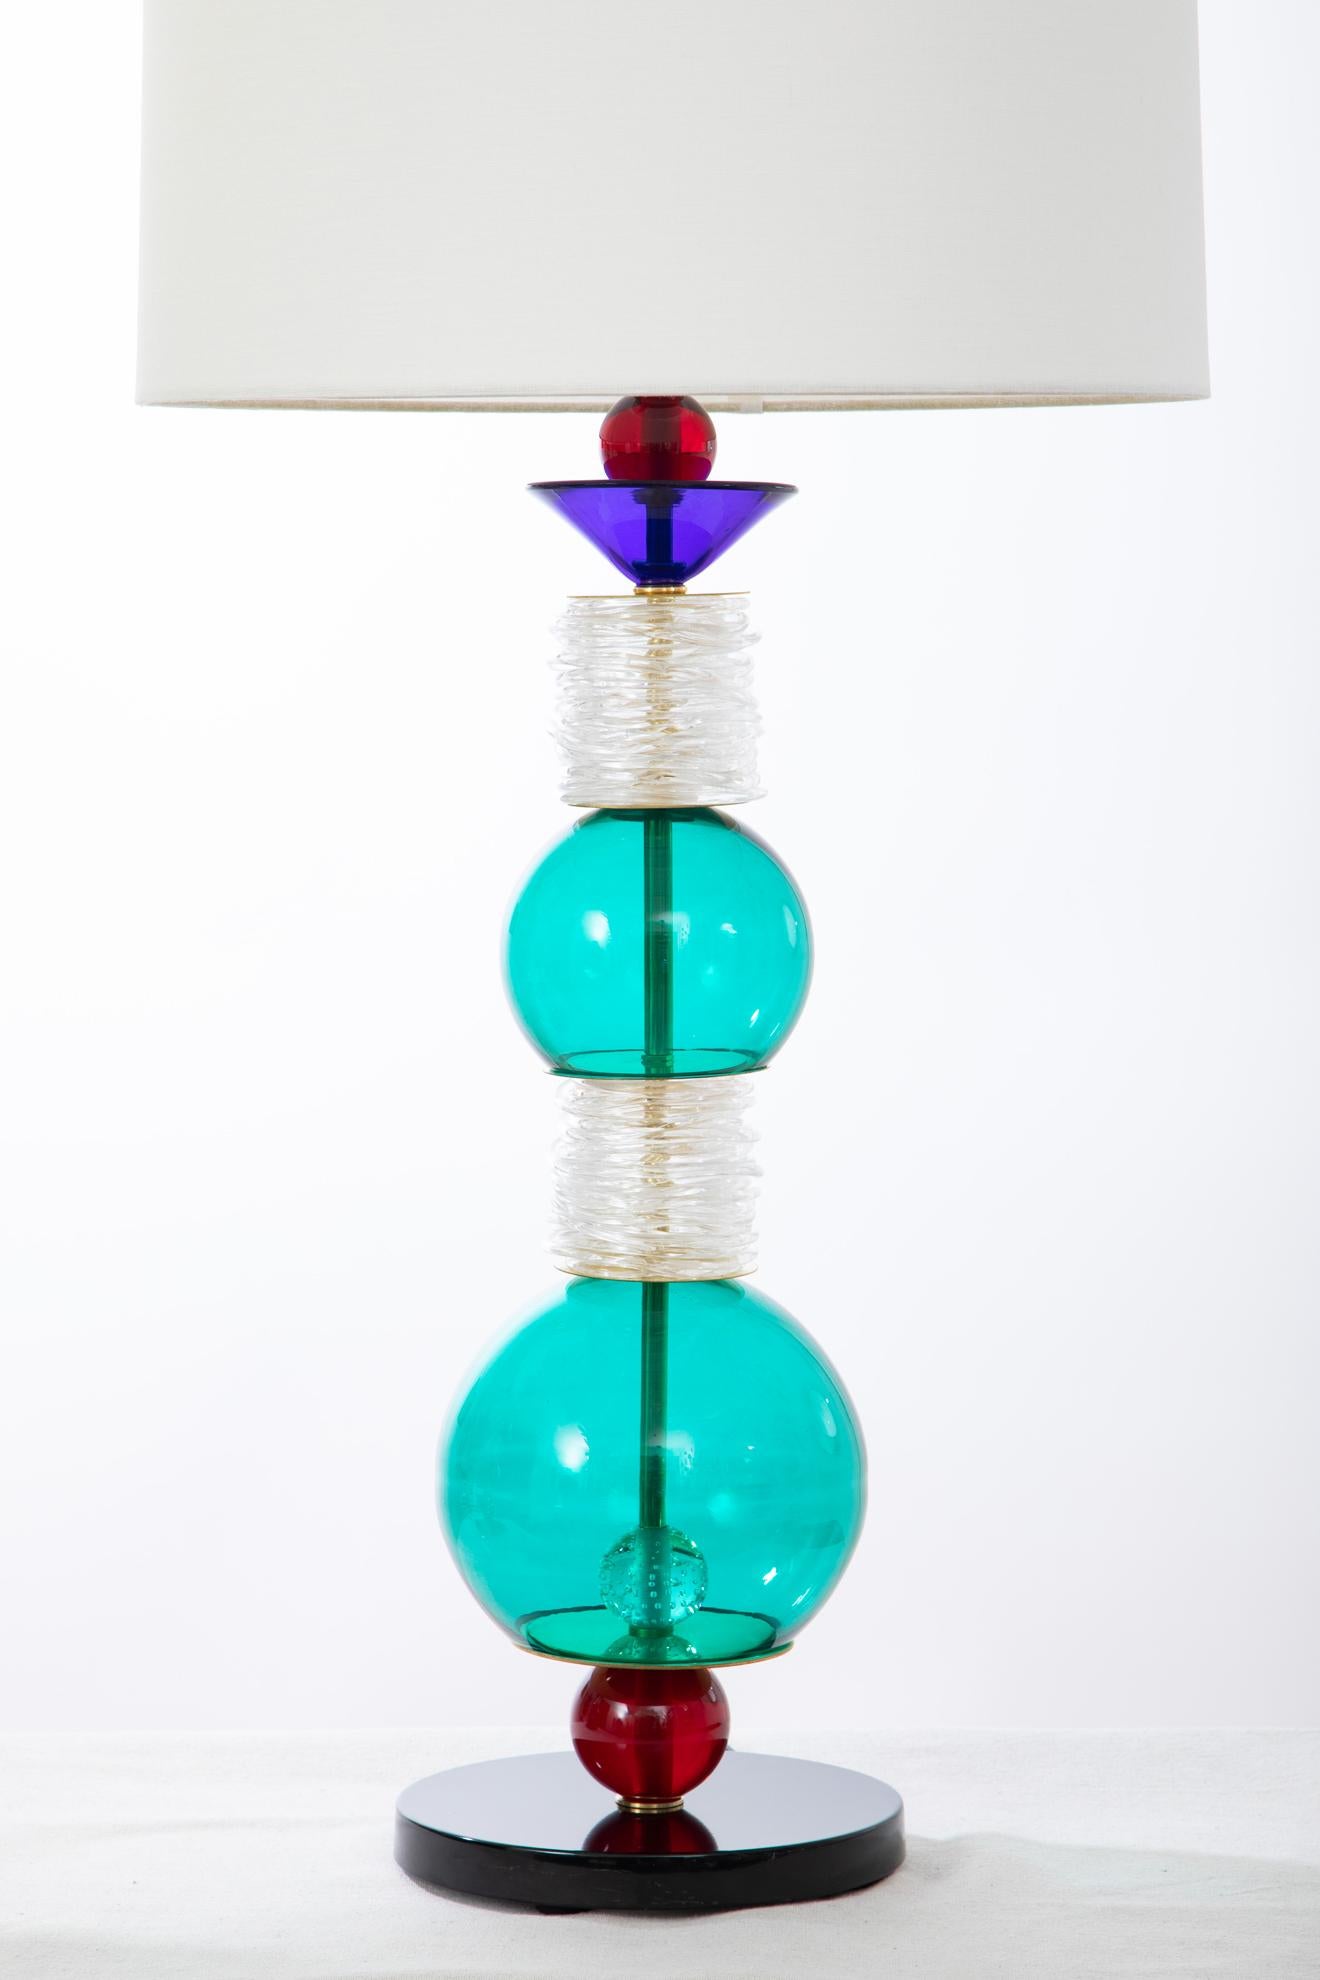 Pair of studio Murano glass table lamps, Italy in stock.
One of a kind colorful table lamps.
Wired to the American standard.
31.5